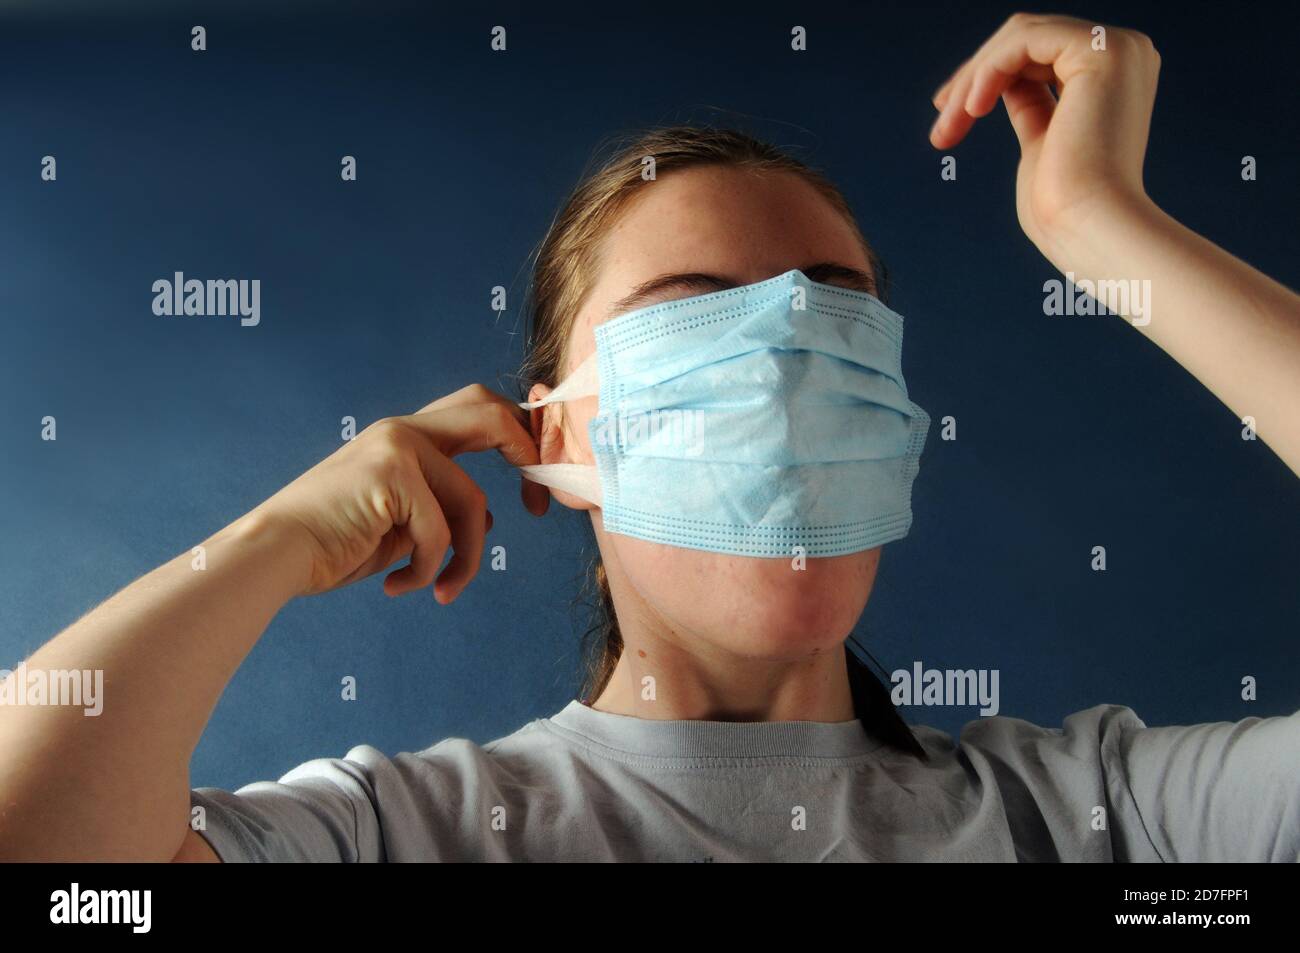 Teenage girl holding a face mask covering all her  face  during the corona virus or Covid-19 pandemic - concept image Stock Photo